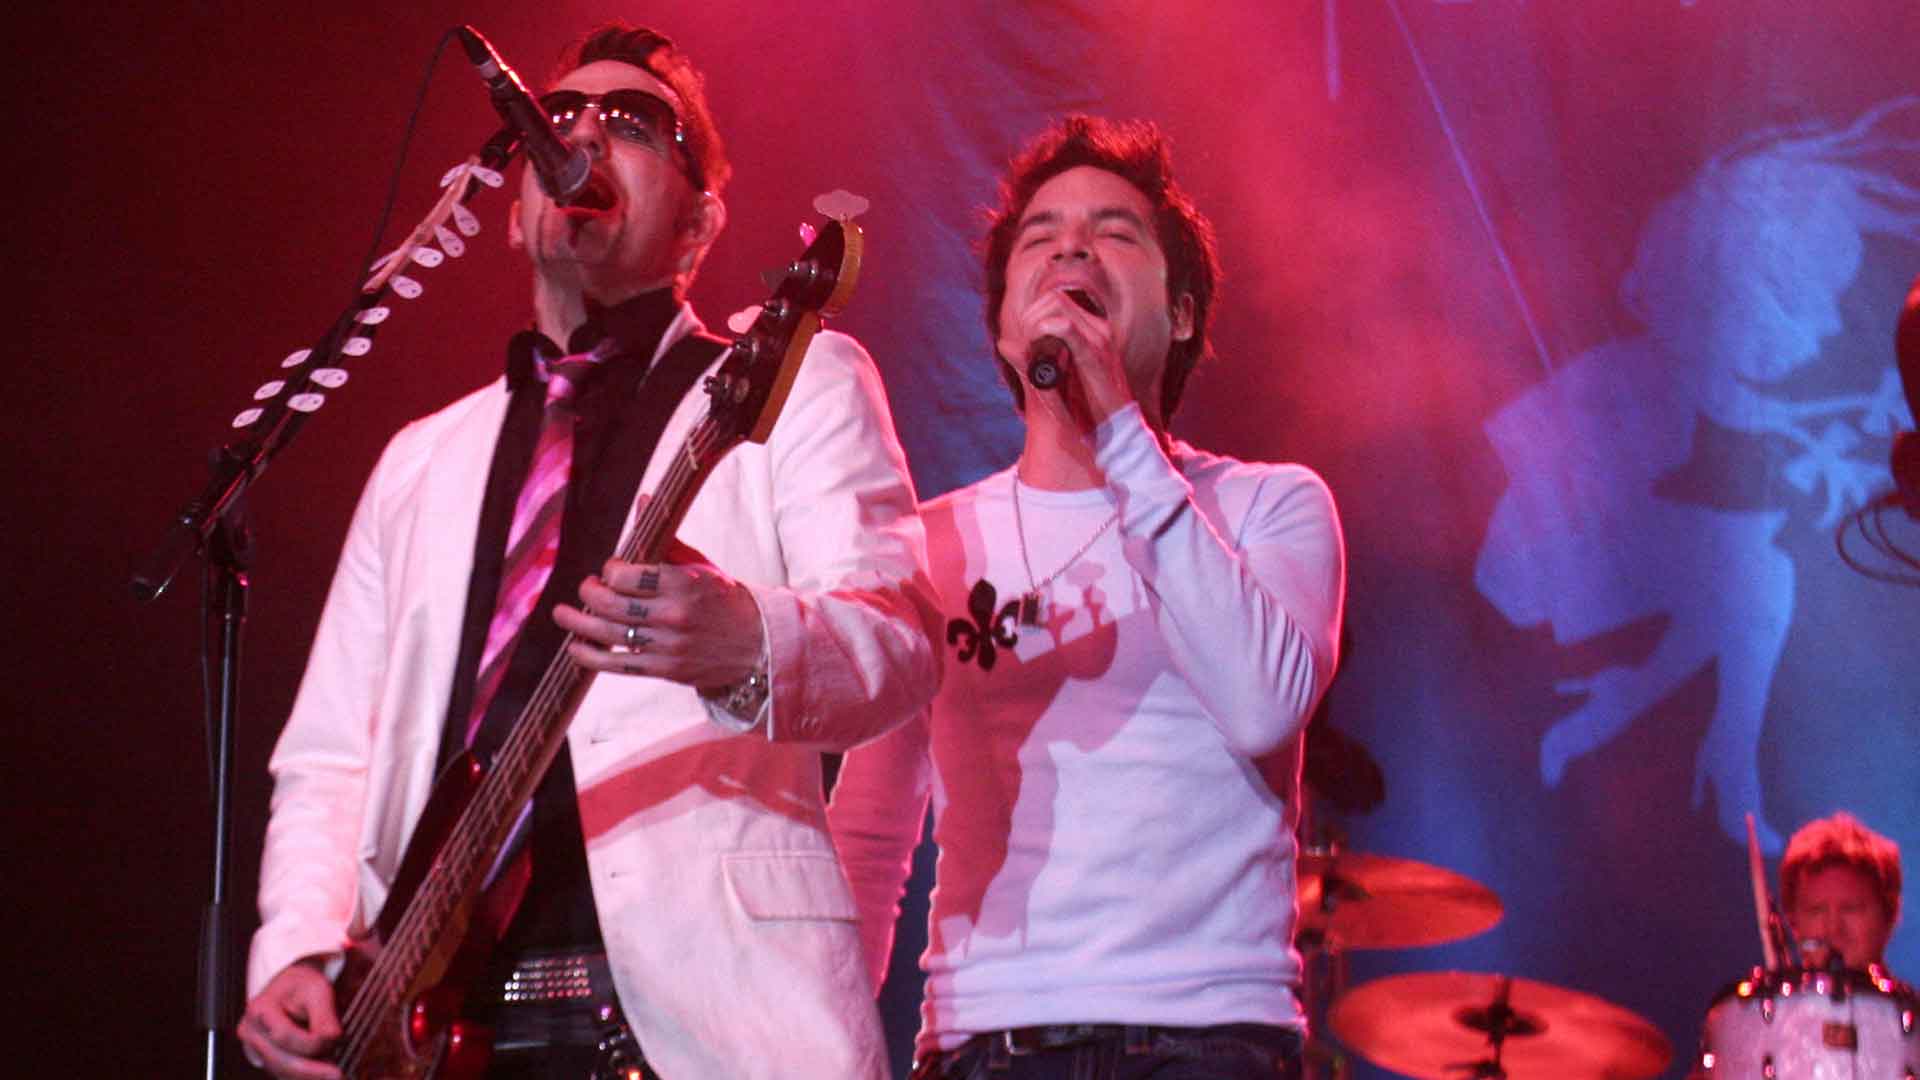 A man in sunglasses plays the bass guitar while a man sings next to him